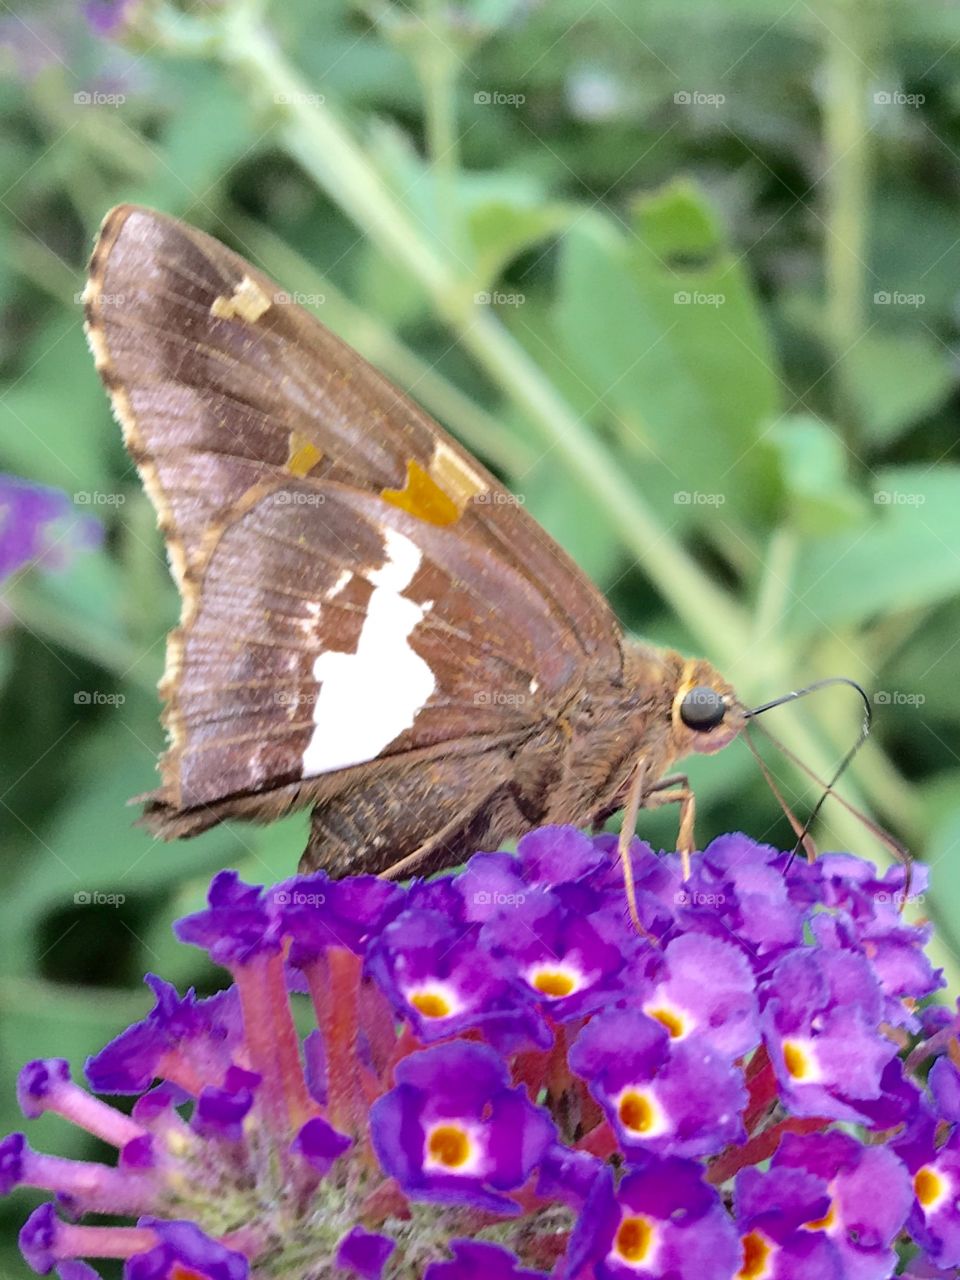 Sphinx Moth on Purple Butterfly Bush. If you look close you'll see the proboscis that's like a straw for drinking the nectar. It uncoils to do this! 💜